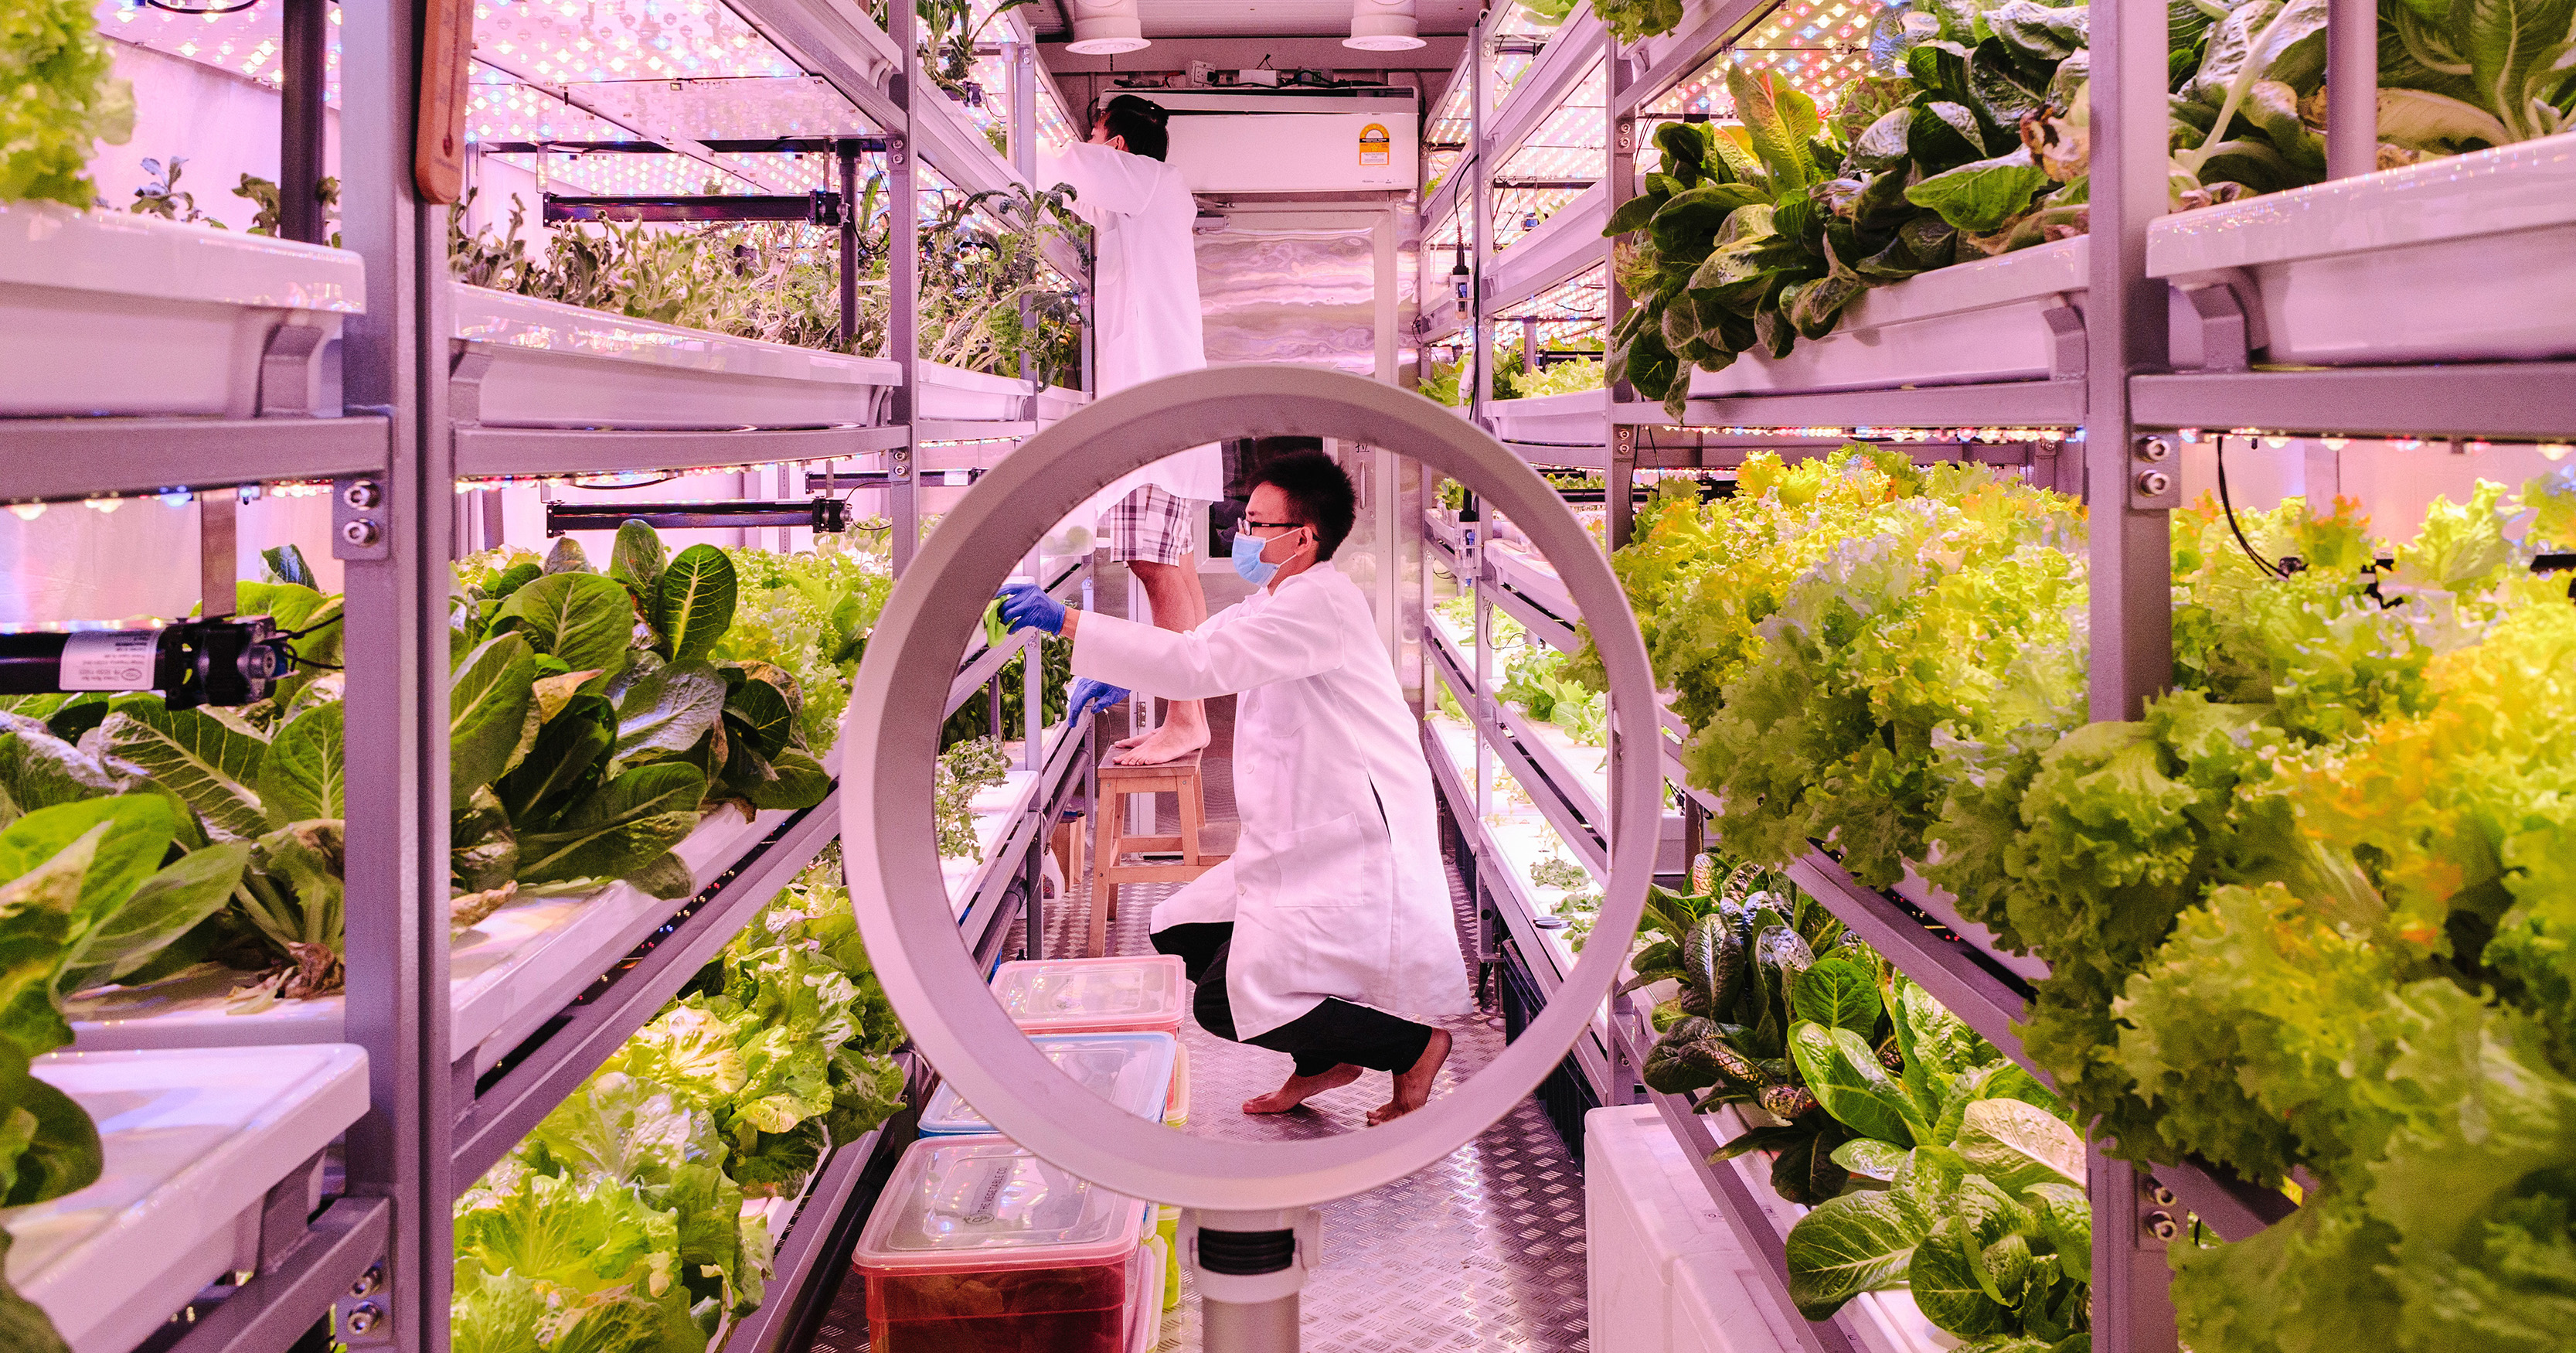 Start up Future Farms in Kuala Lumpur is a converted storage container where vegetables are grown using hydroponics - LED lighting and no pesticides